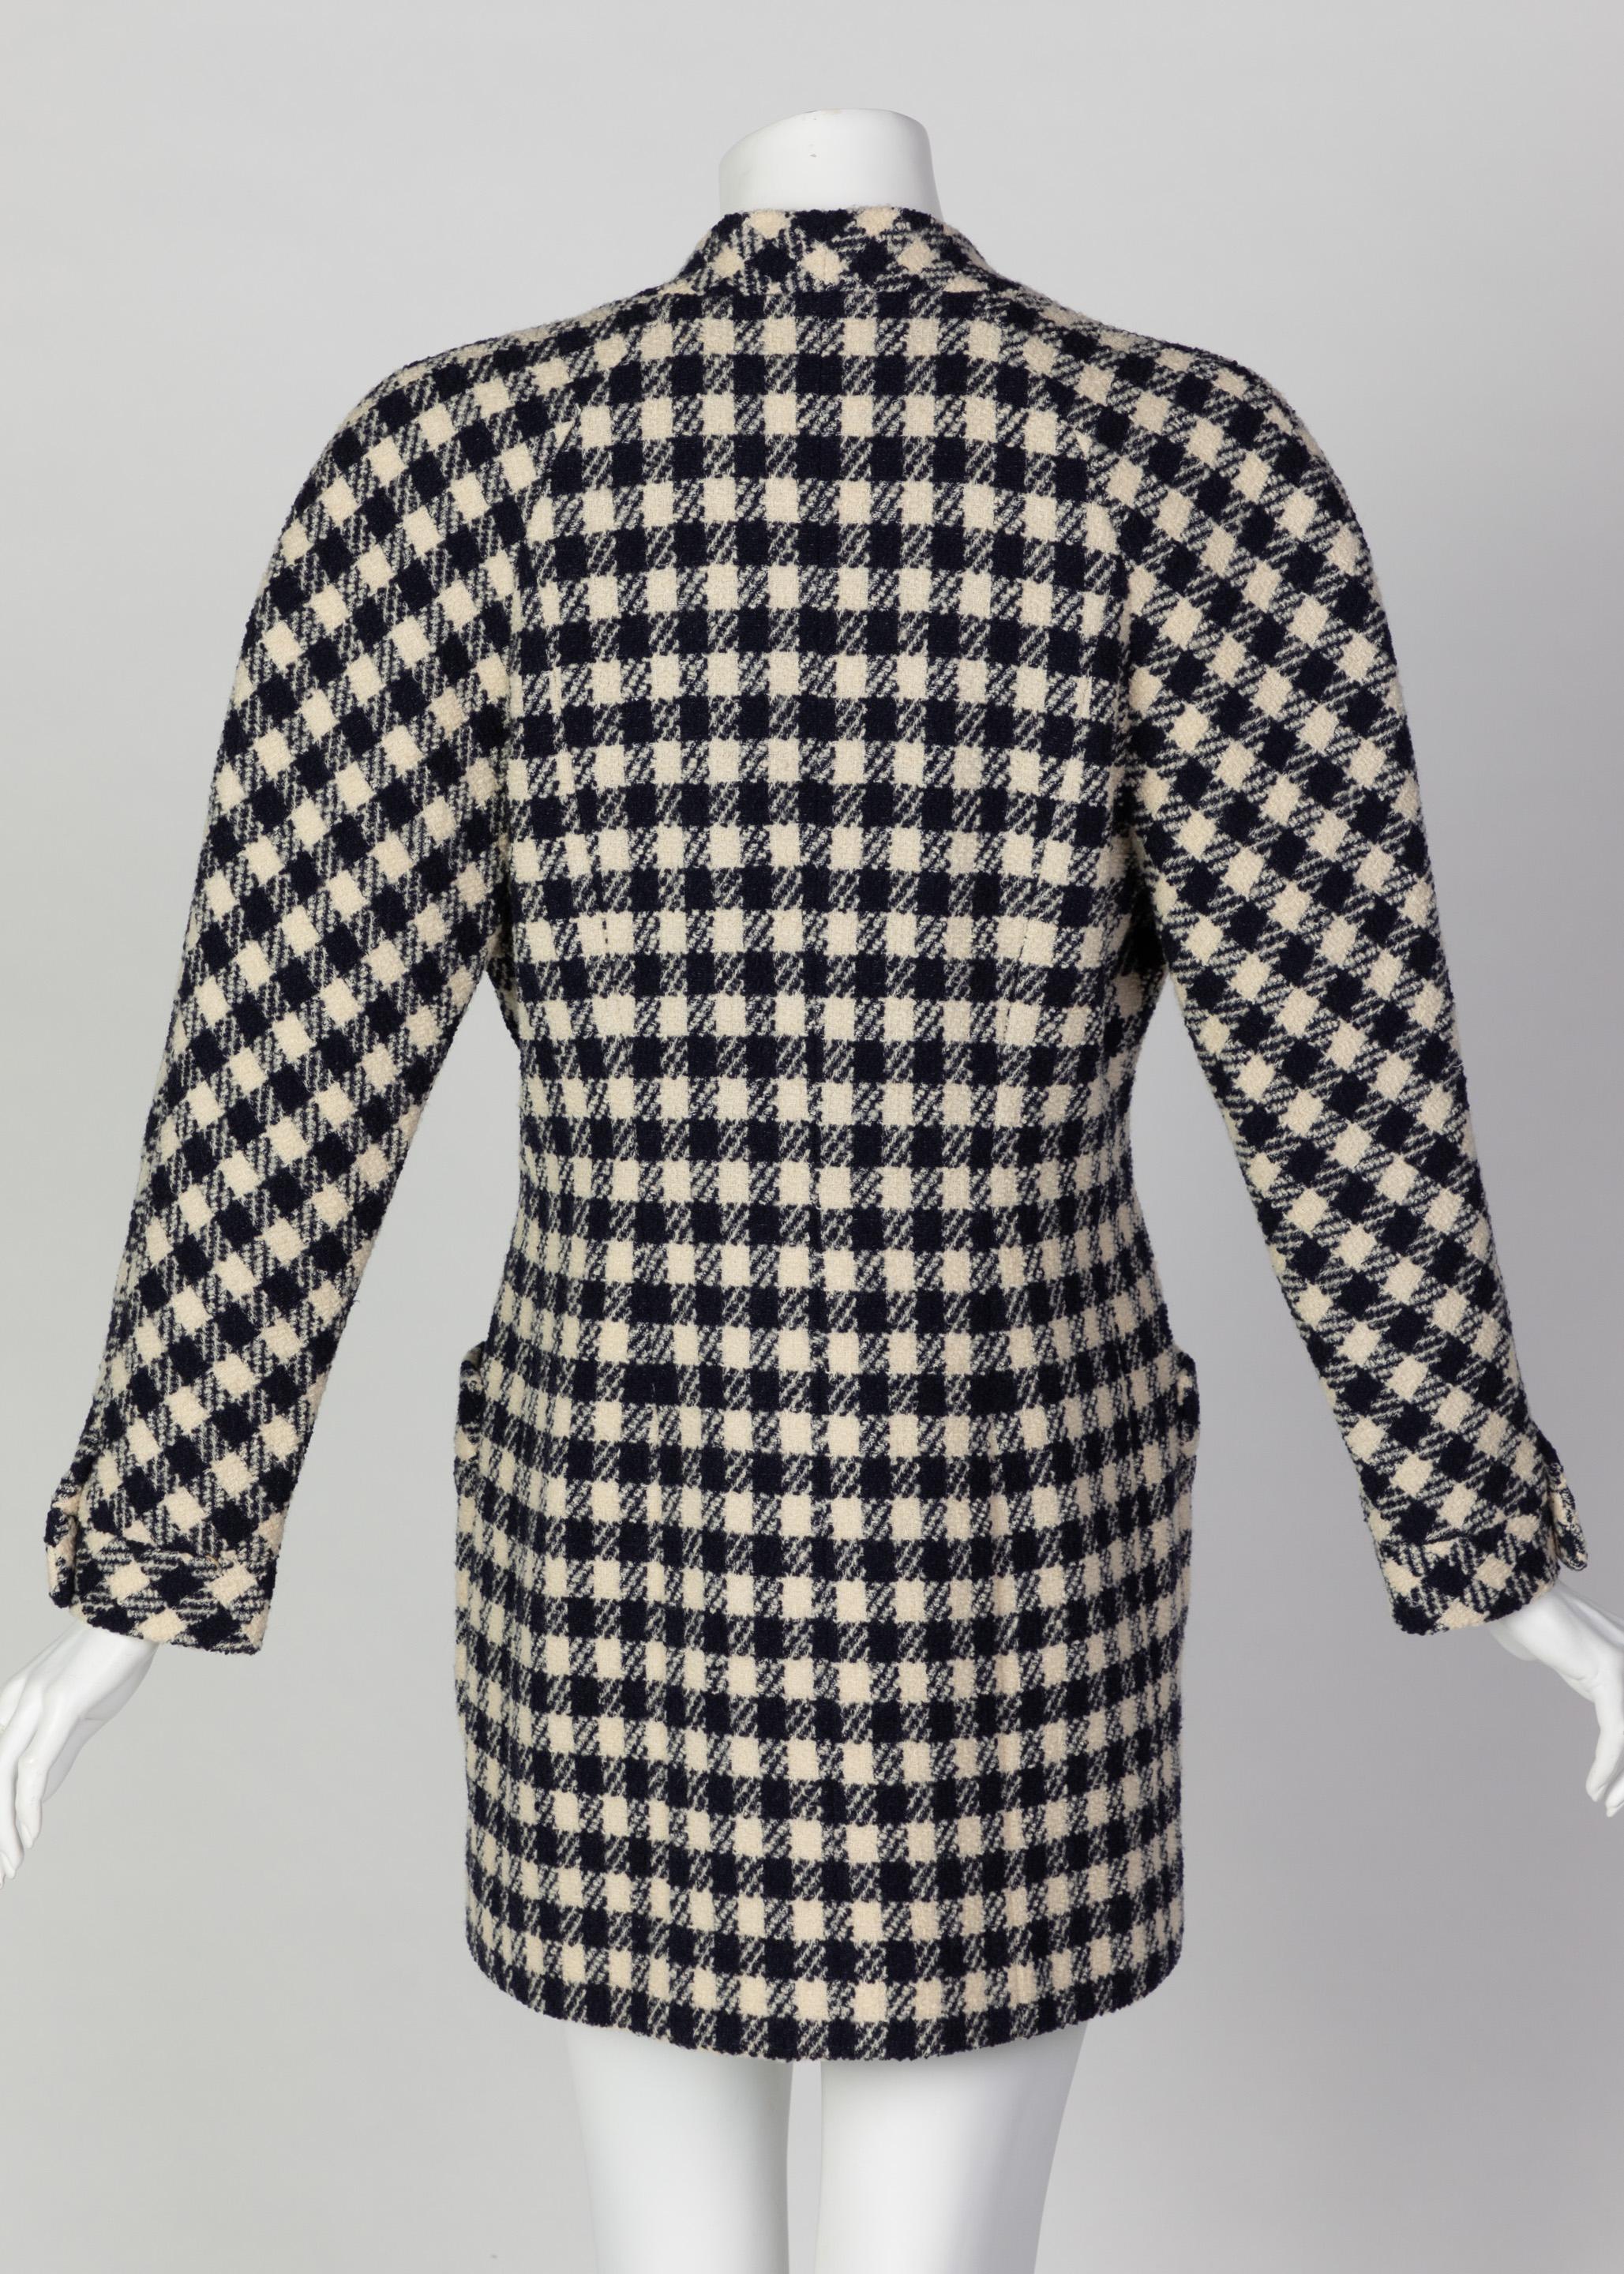 Chanel Midnight Blue Crème Wool Check Gold Button Cardigan Jacket, 1980s In Excellent Condition For Sale In Boca Raton, FL